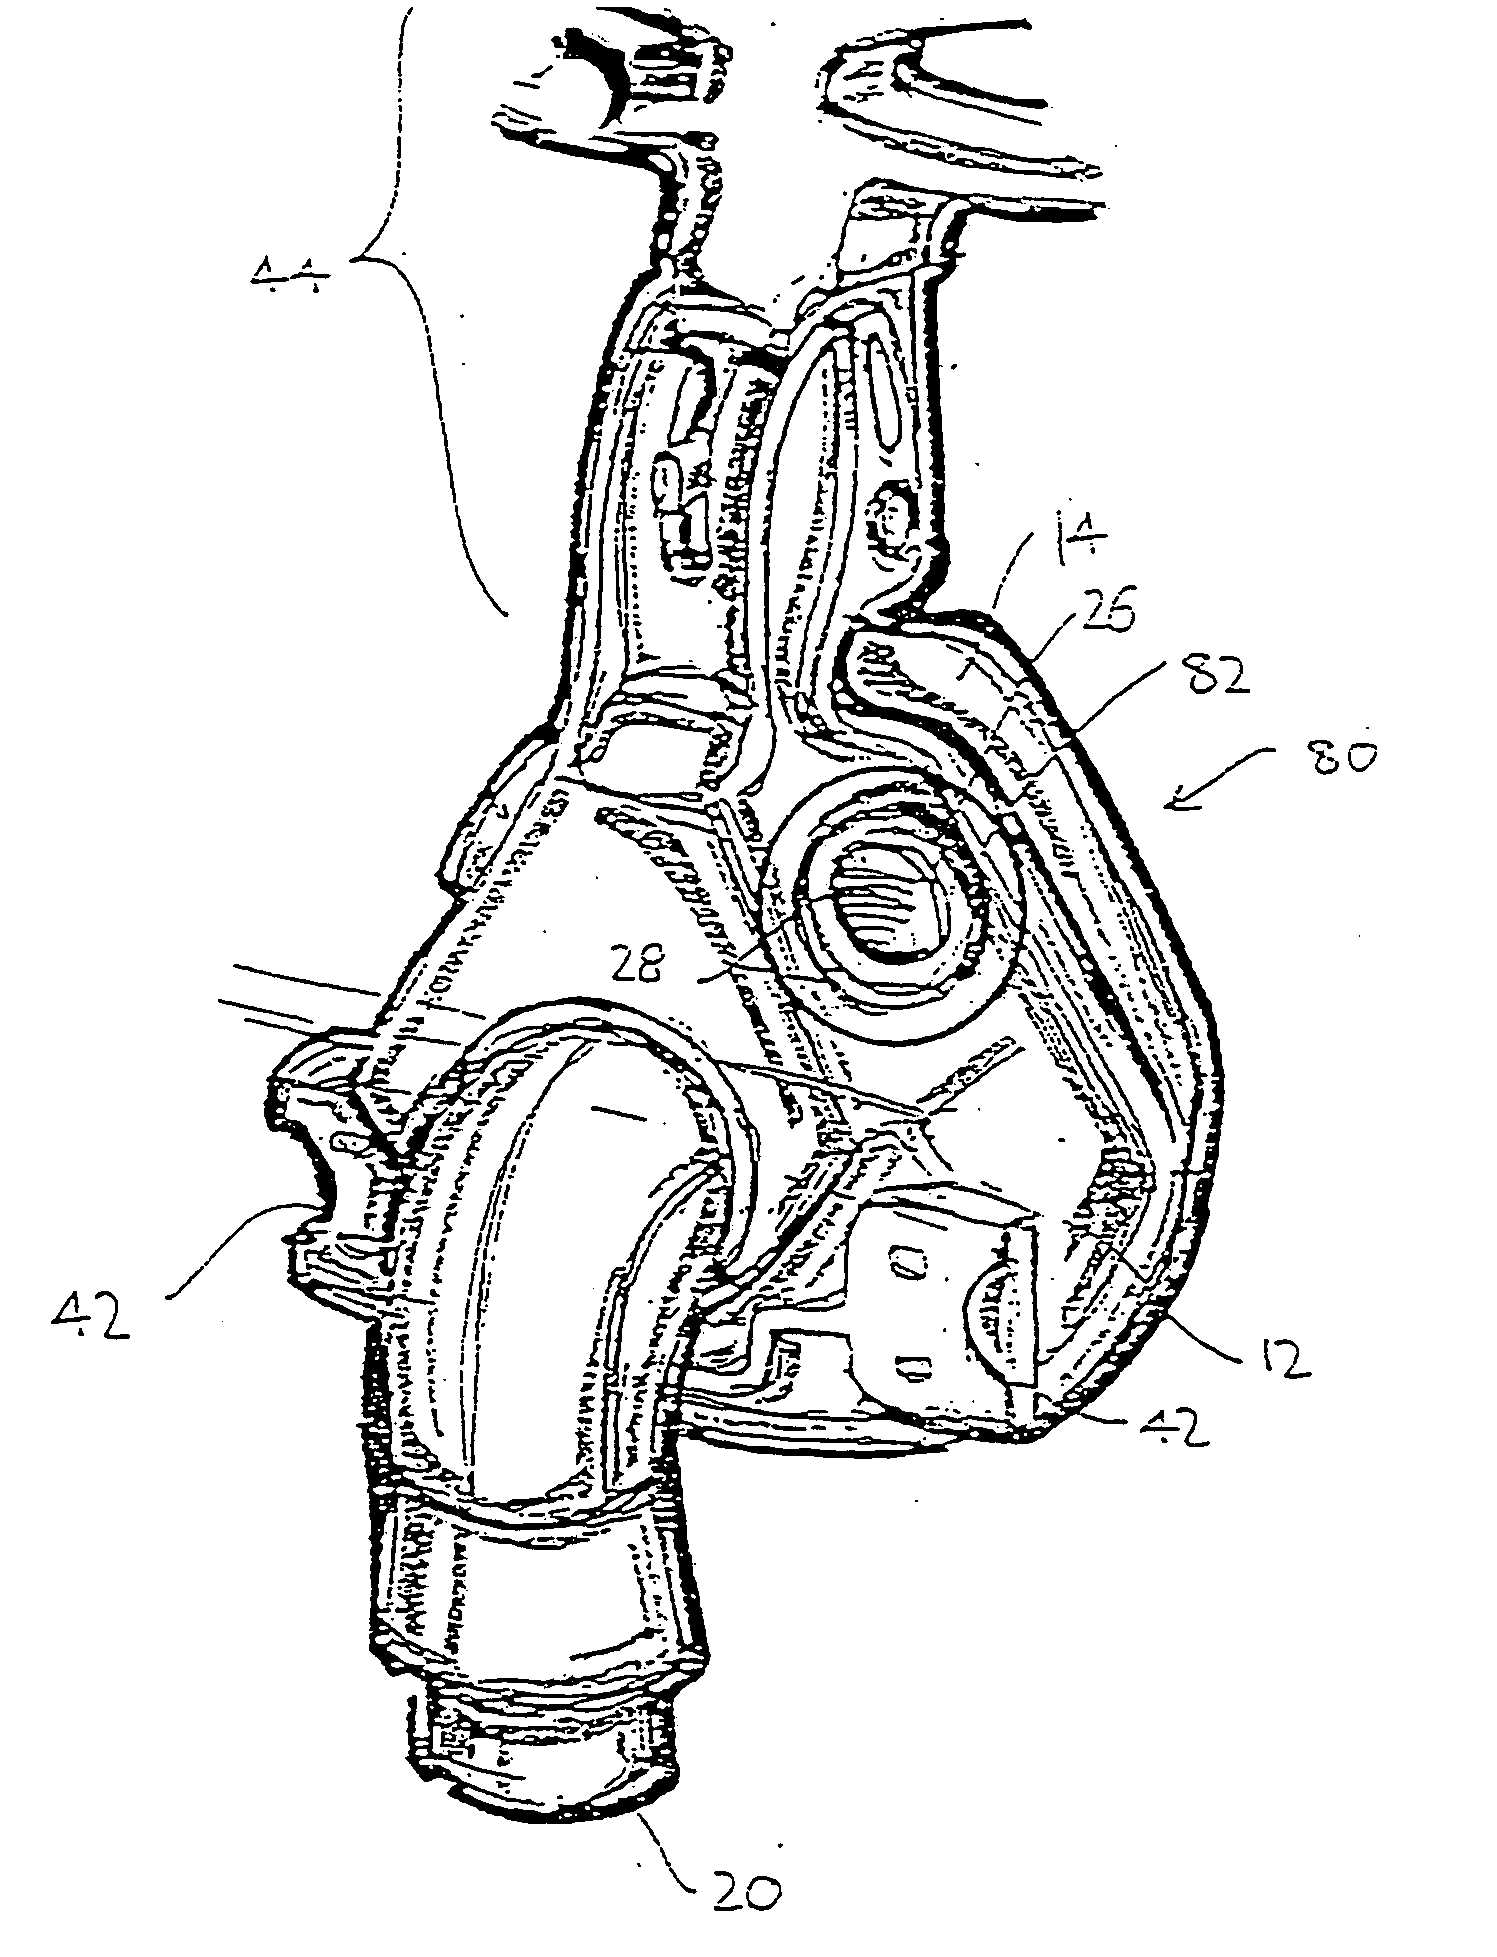 Respiratory mask having gas washout vent and gas washout vent assembly for respiratory mask